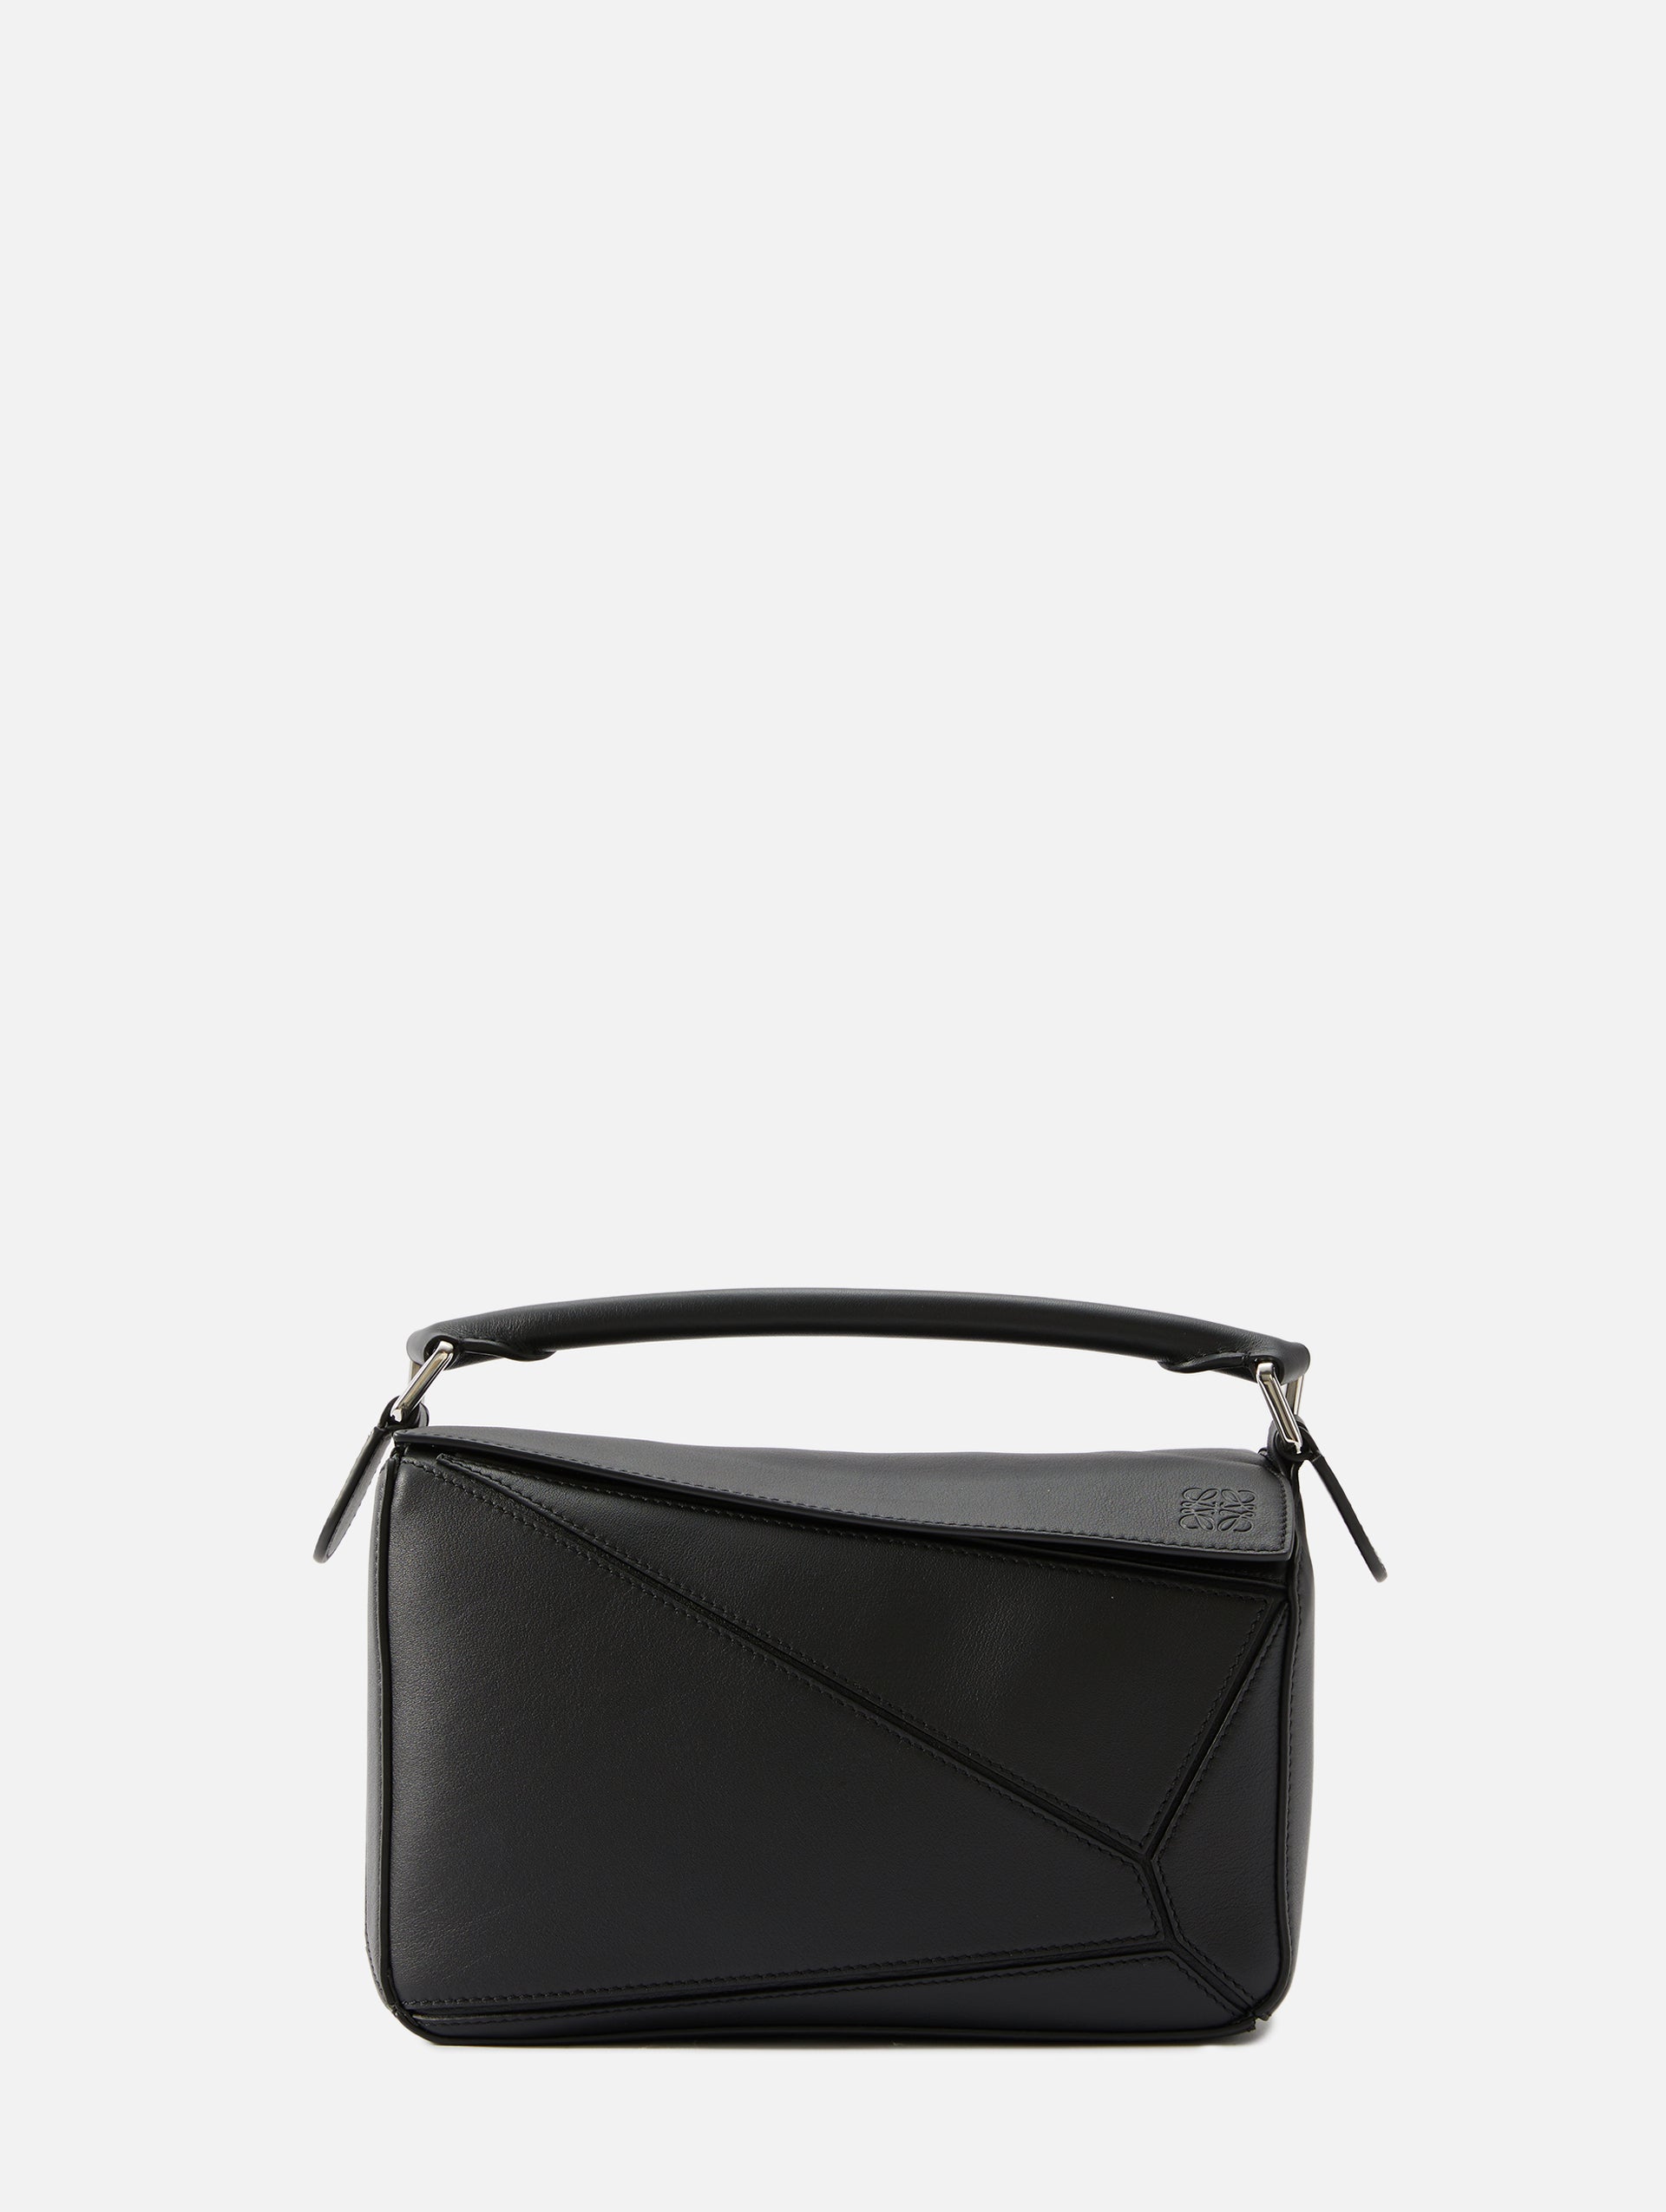 Loewe Black Puzzle bag in grained leather